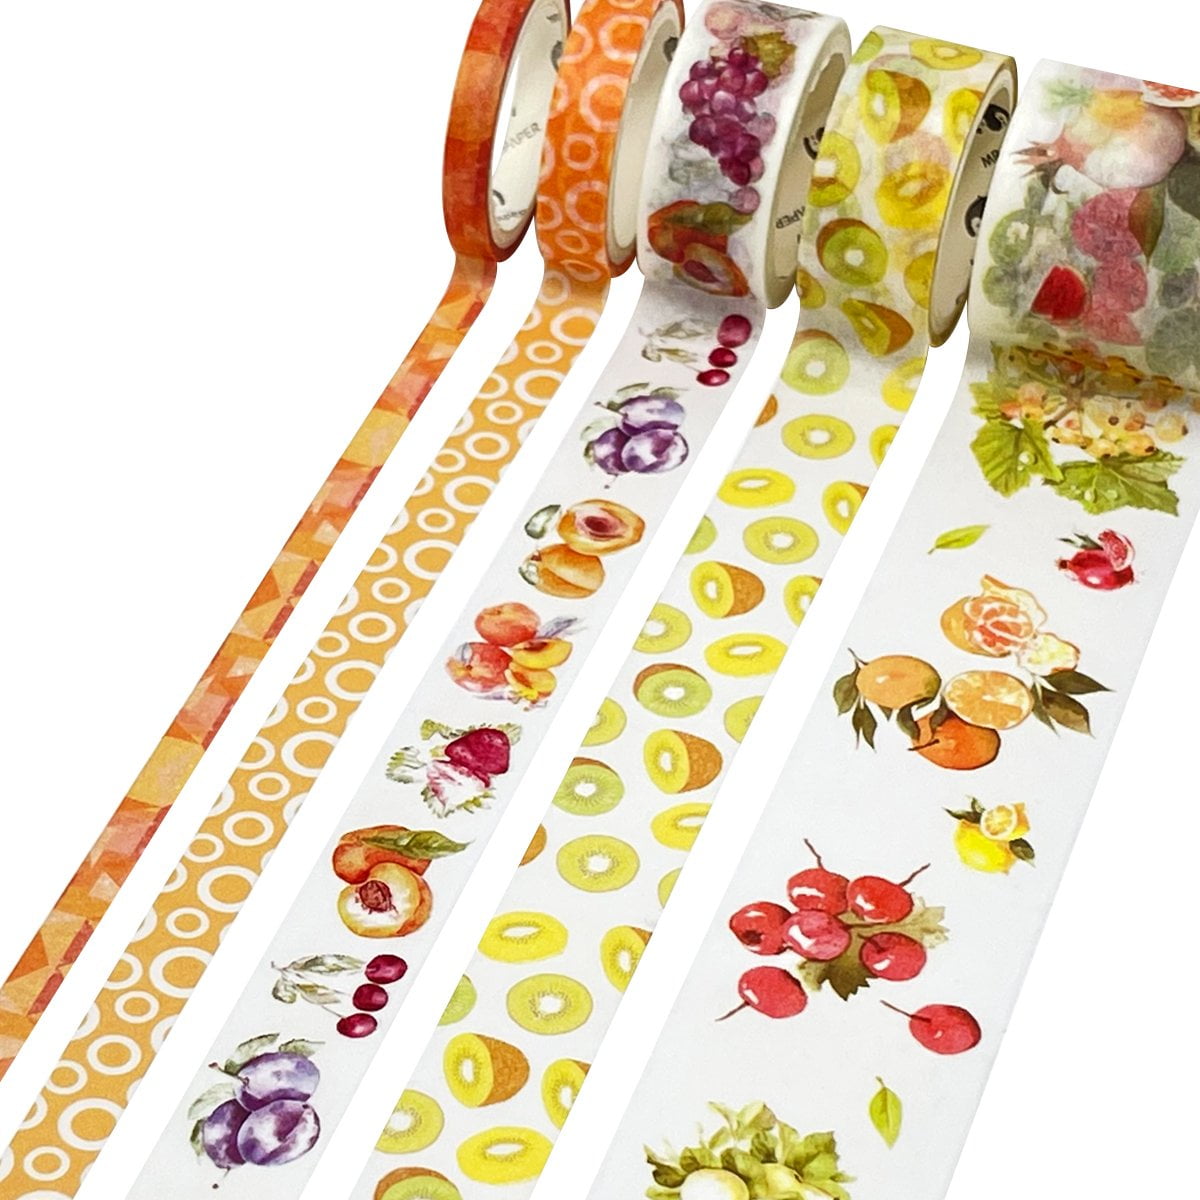 Zuozee 28 Rolls Washi Tape Set, 3 Size Washi Tapes for Decoration, Floral  Washi Tape for Scrapbooking, Decorative Tape for DIY Crafts, Gift Wrapping